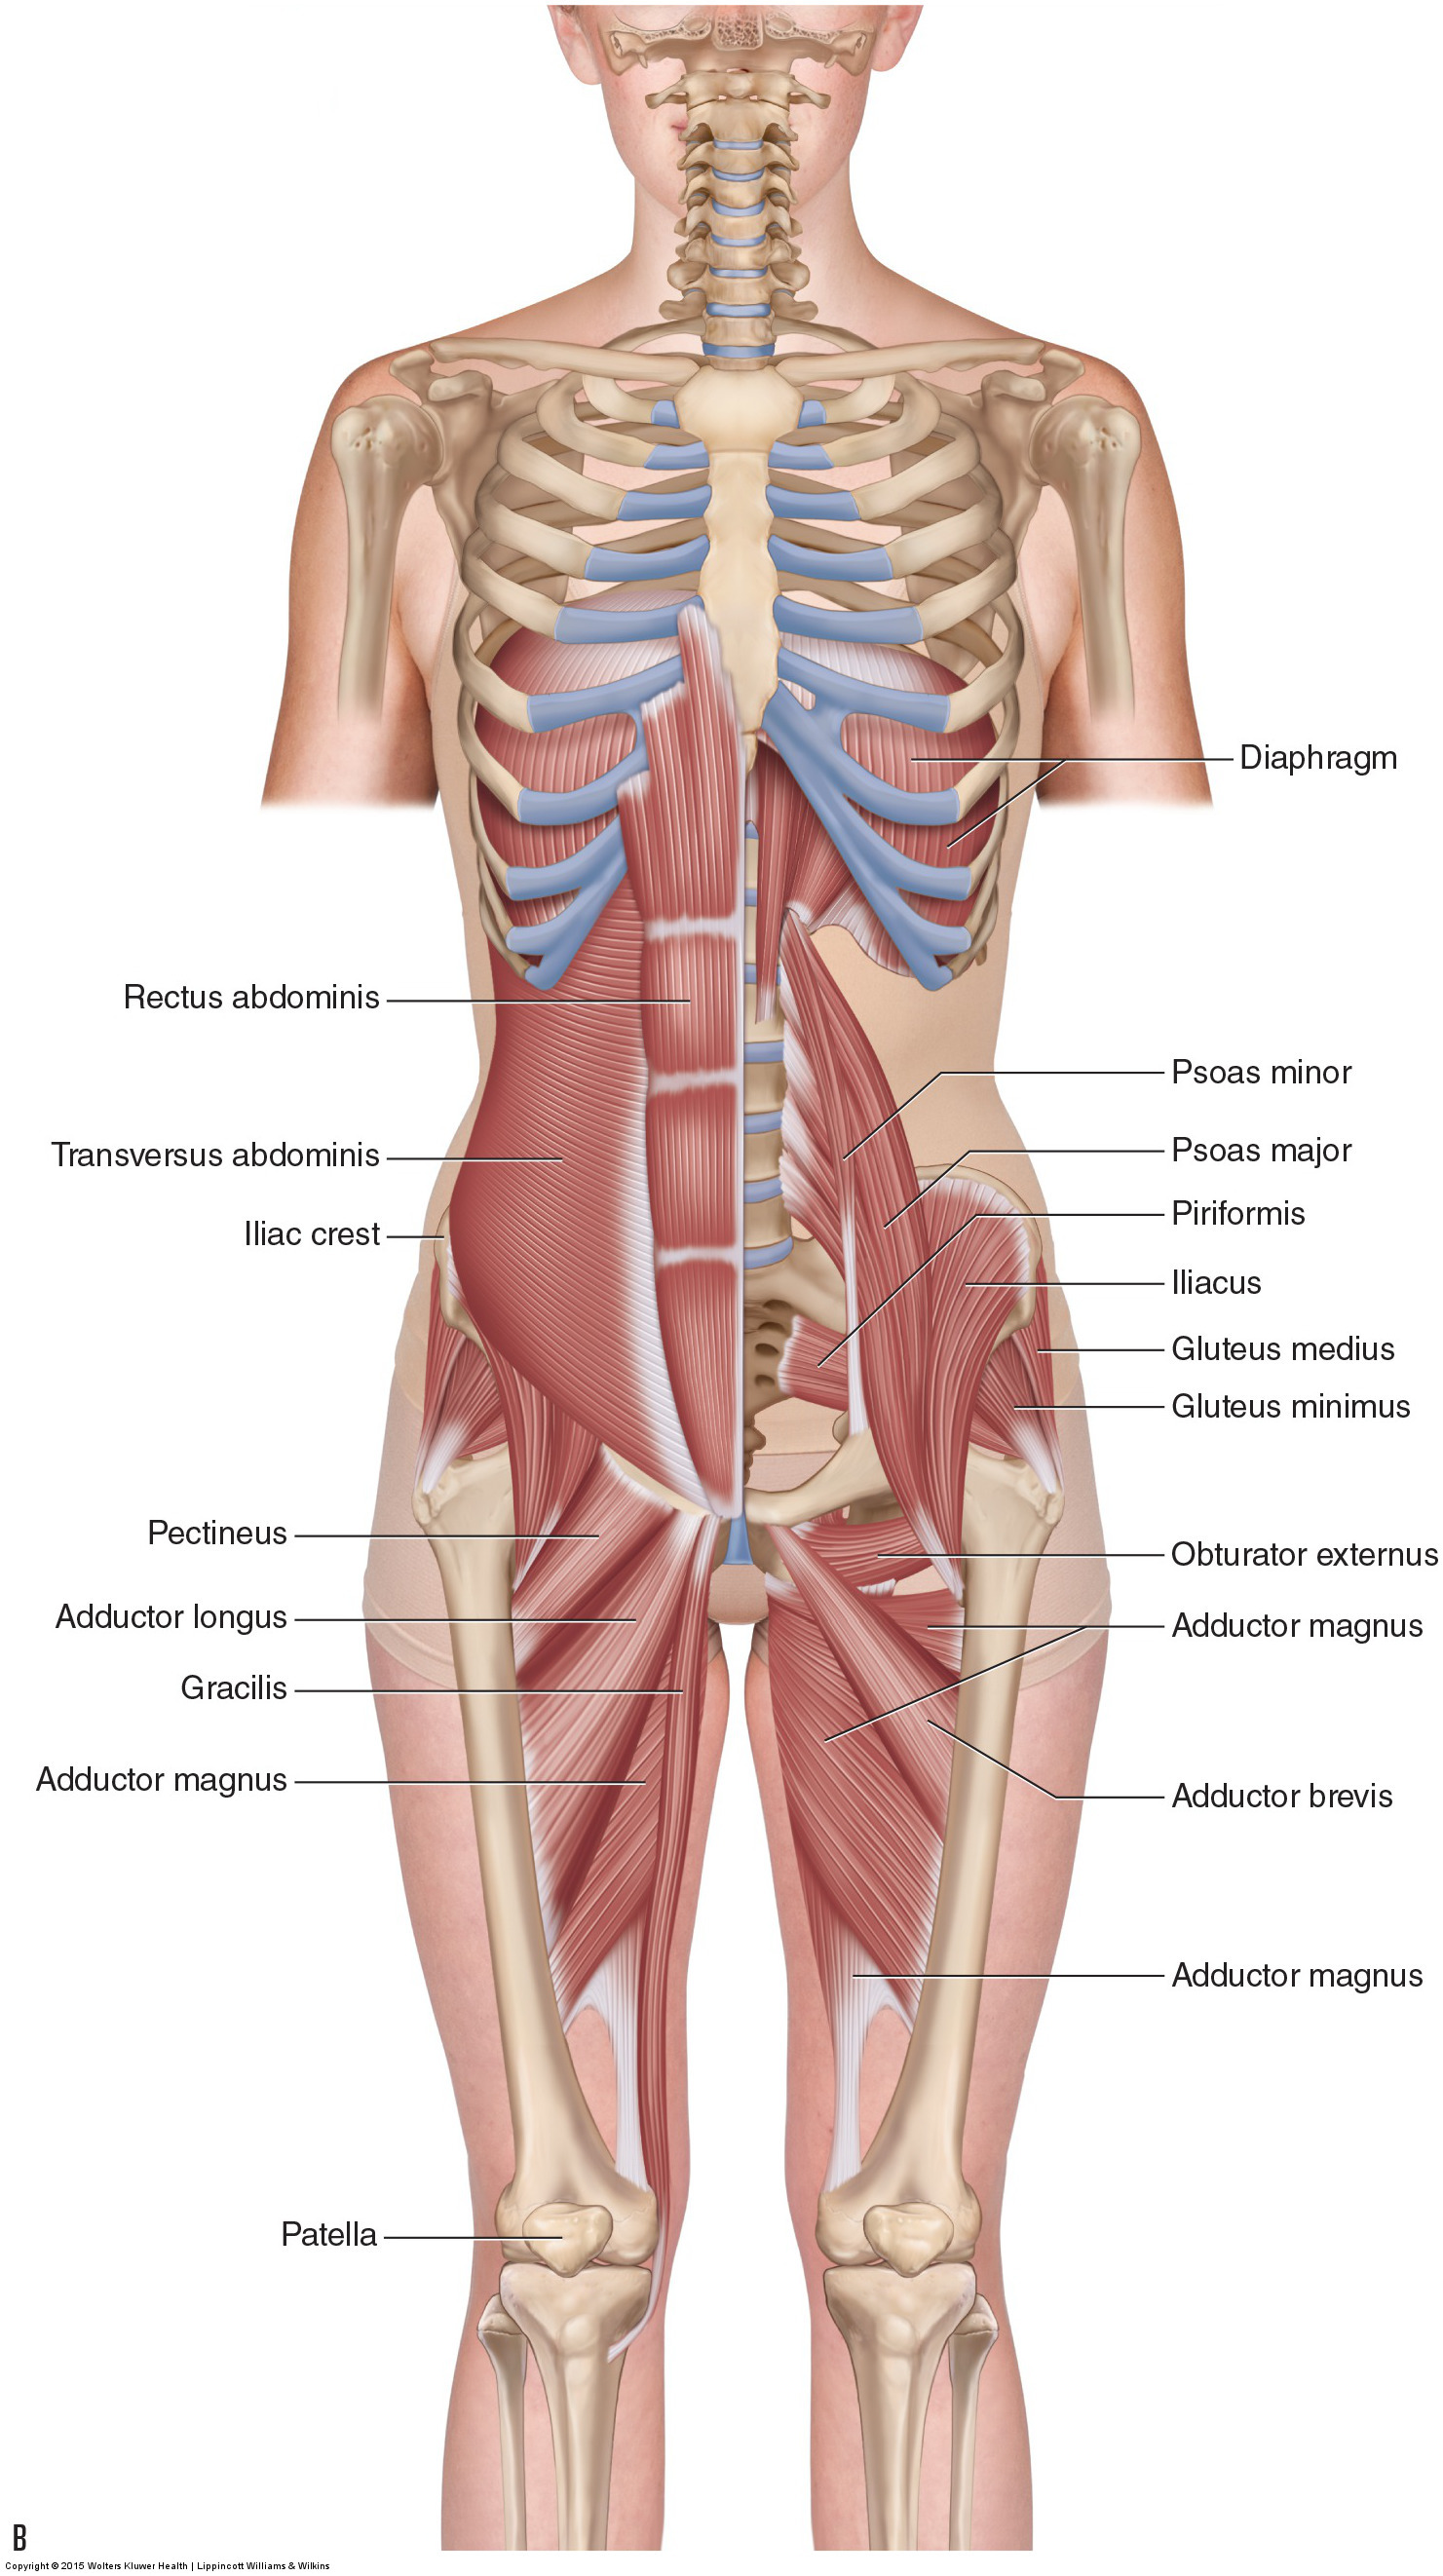 : Anterior view. The adductor group is composed of the adductors longus, brevis, and magnus, as well as the pectineus and gracilis muscles. Permission: Joseph E. Muscolino. Manual Therapy for the Low Back and Pelvis (2015).